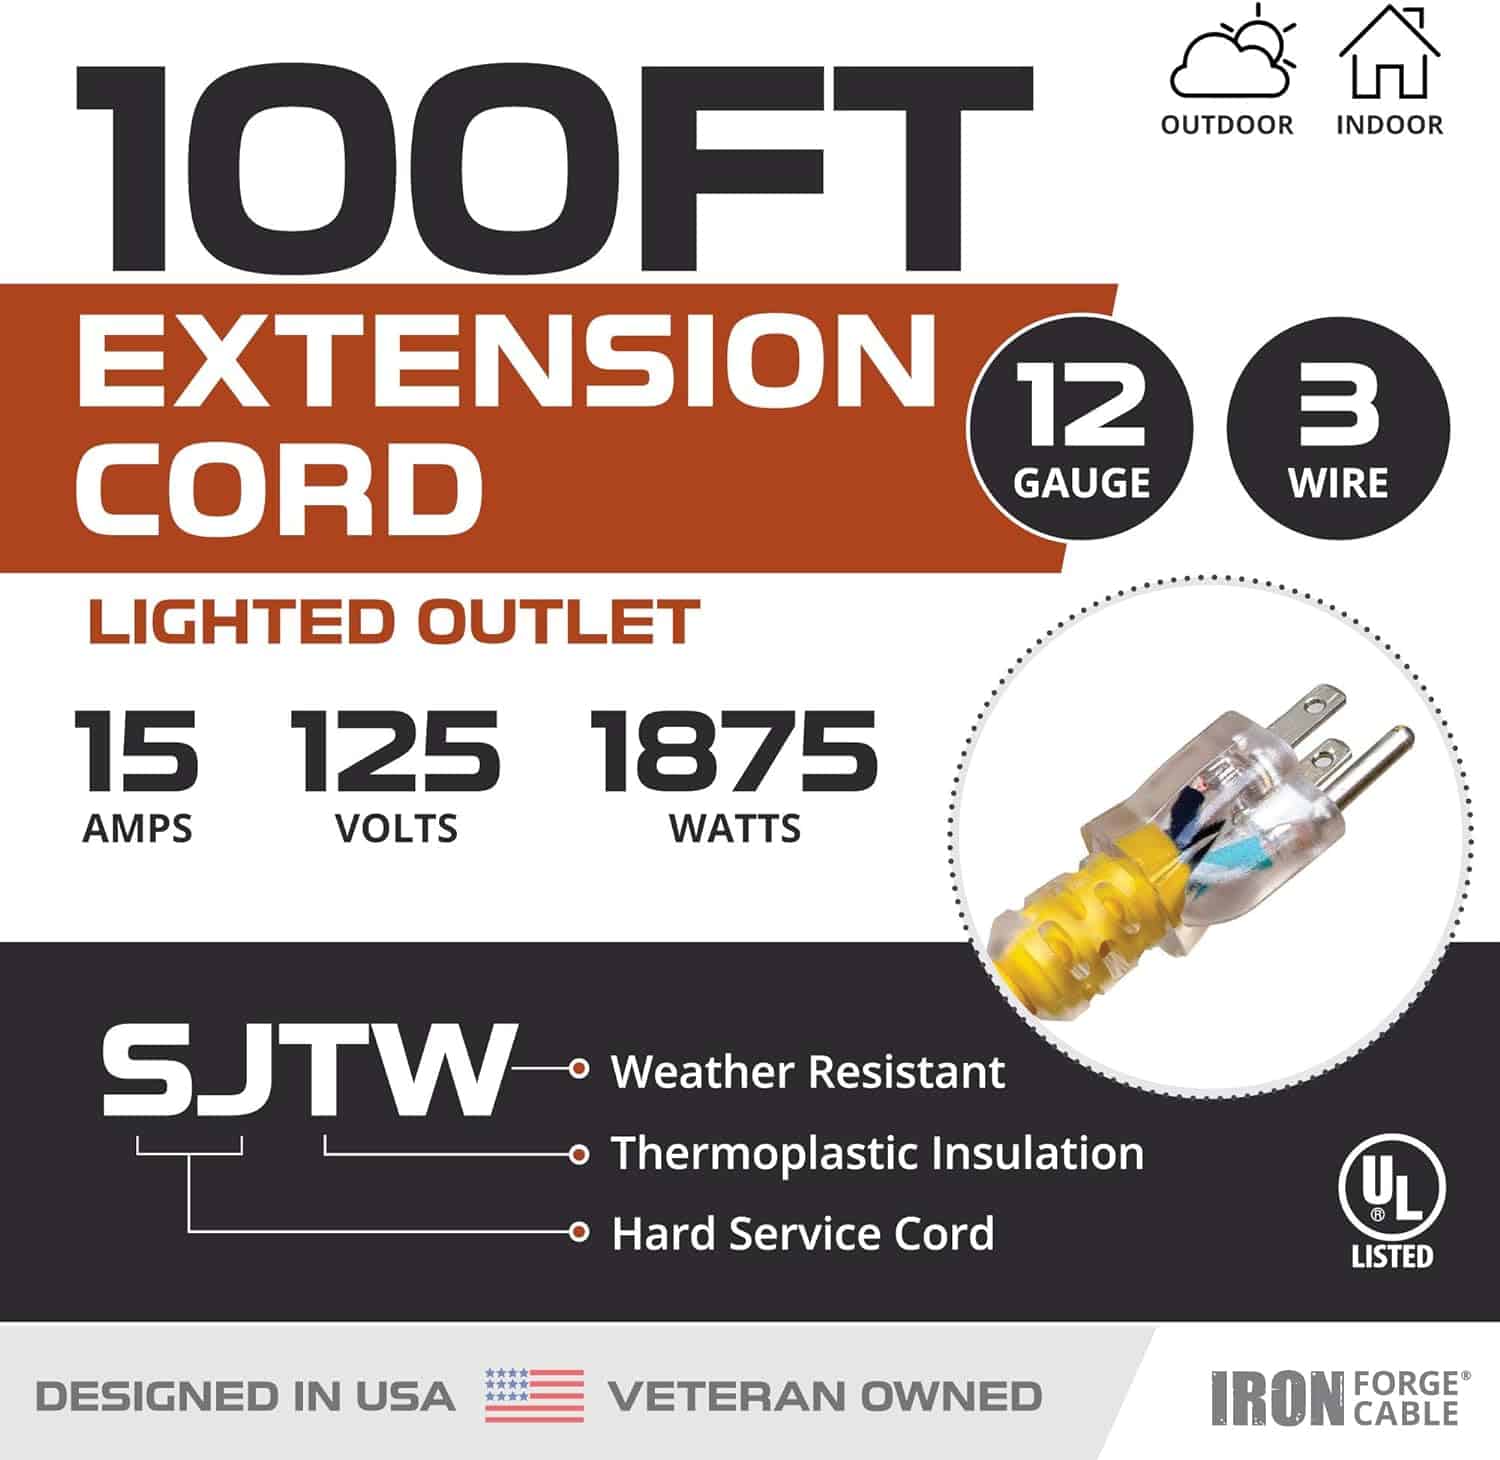 IRON FORGE CABLE 100 Foot Outdoor Extension Cord – 12 3 SJTW Heavy Duty Yellow 3 Prong Extension Cable, 15 AMP – Great for Garden and Major Appliances 2